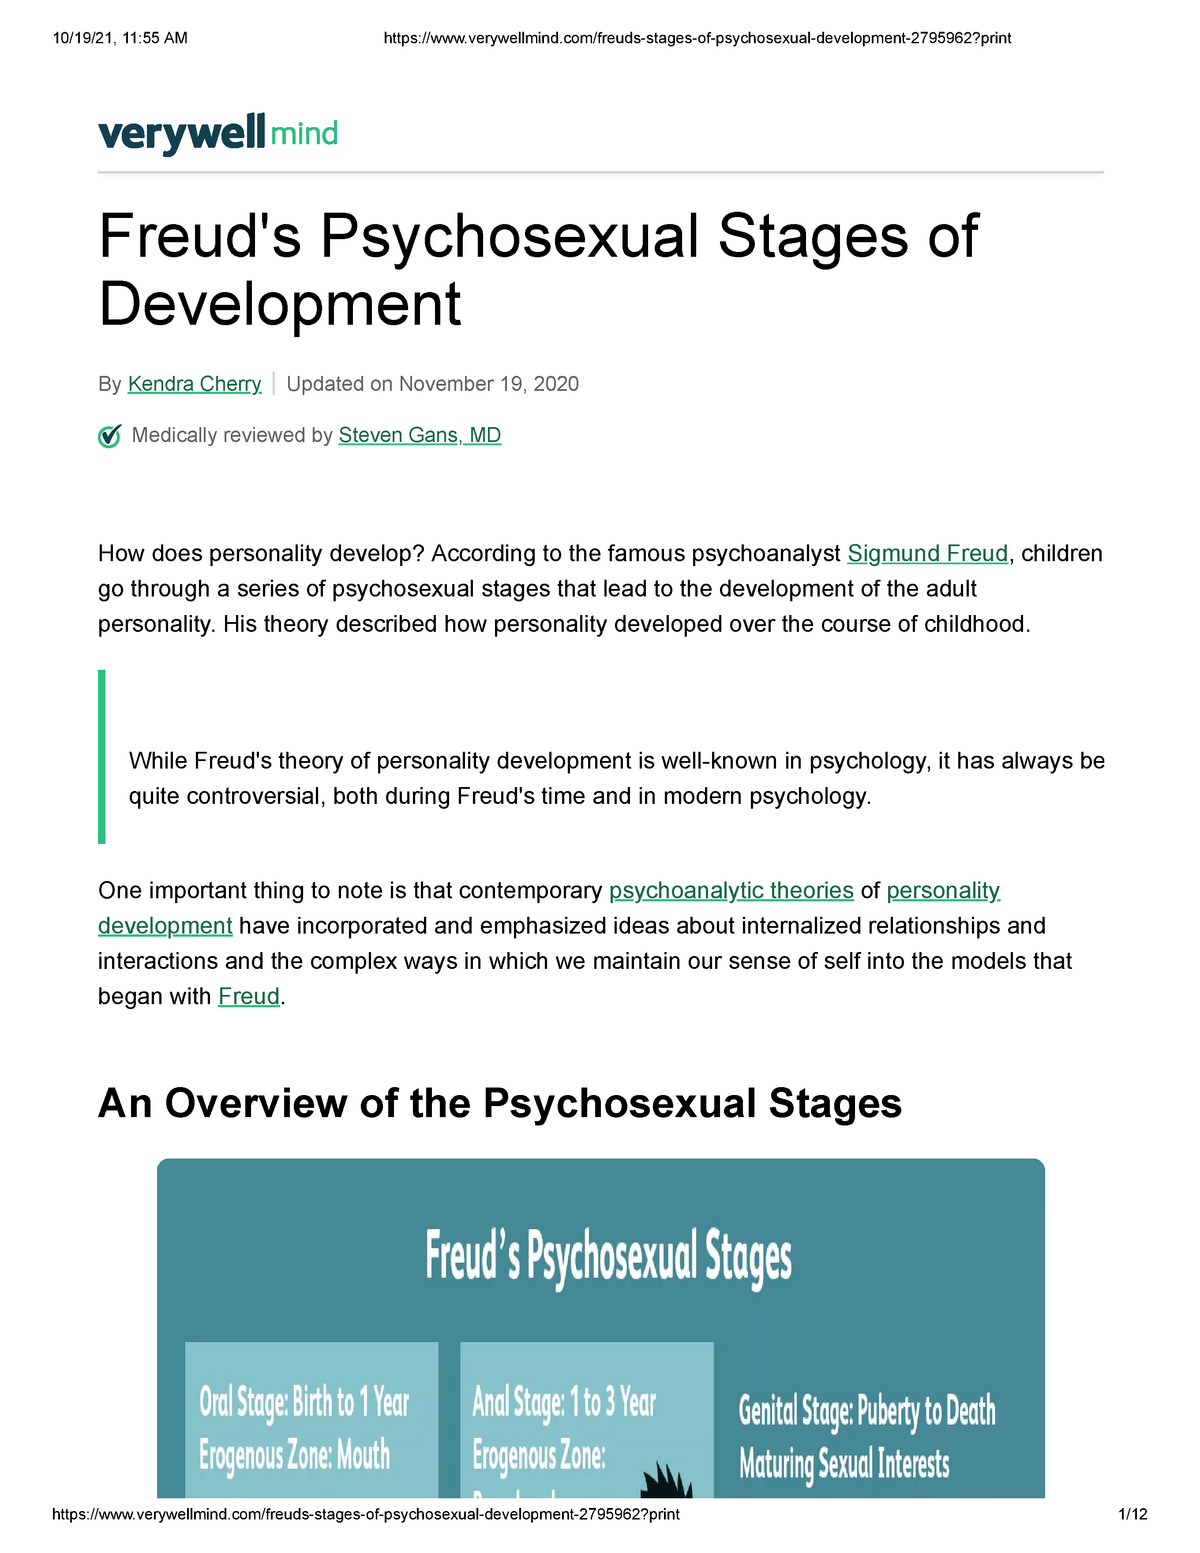 ⭐ Freud Oral Freuds 5 Stages Of Psychosexual Development 2022 11 20